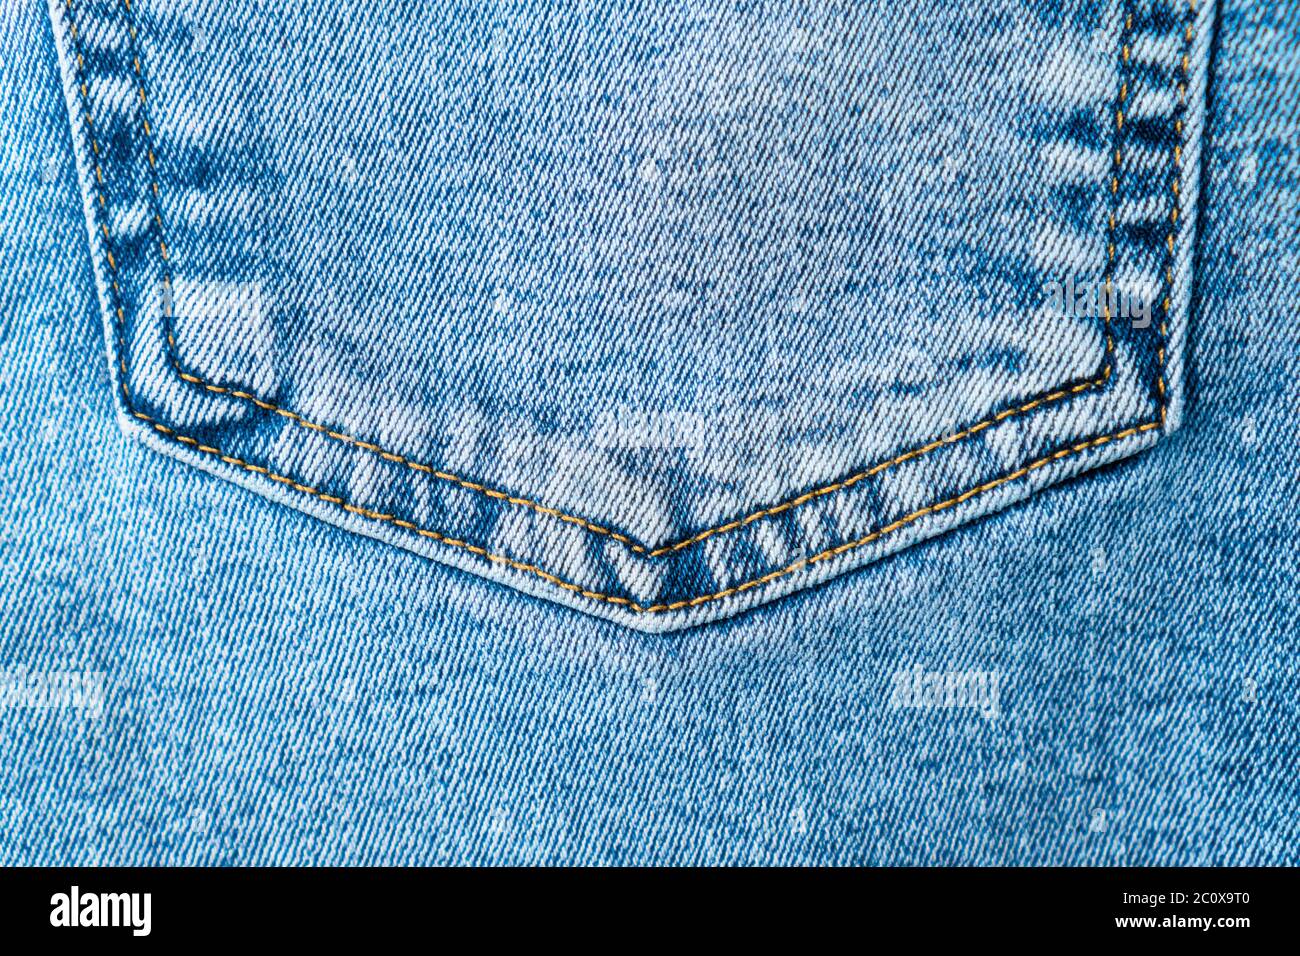 Close-up pocket of denim blue fabric with yellow seams. Fashionable jeans. View from above. Stock Photo